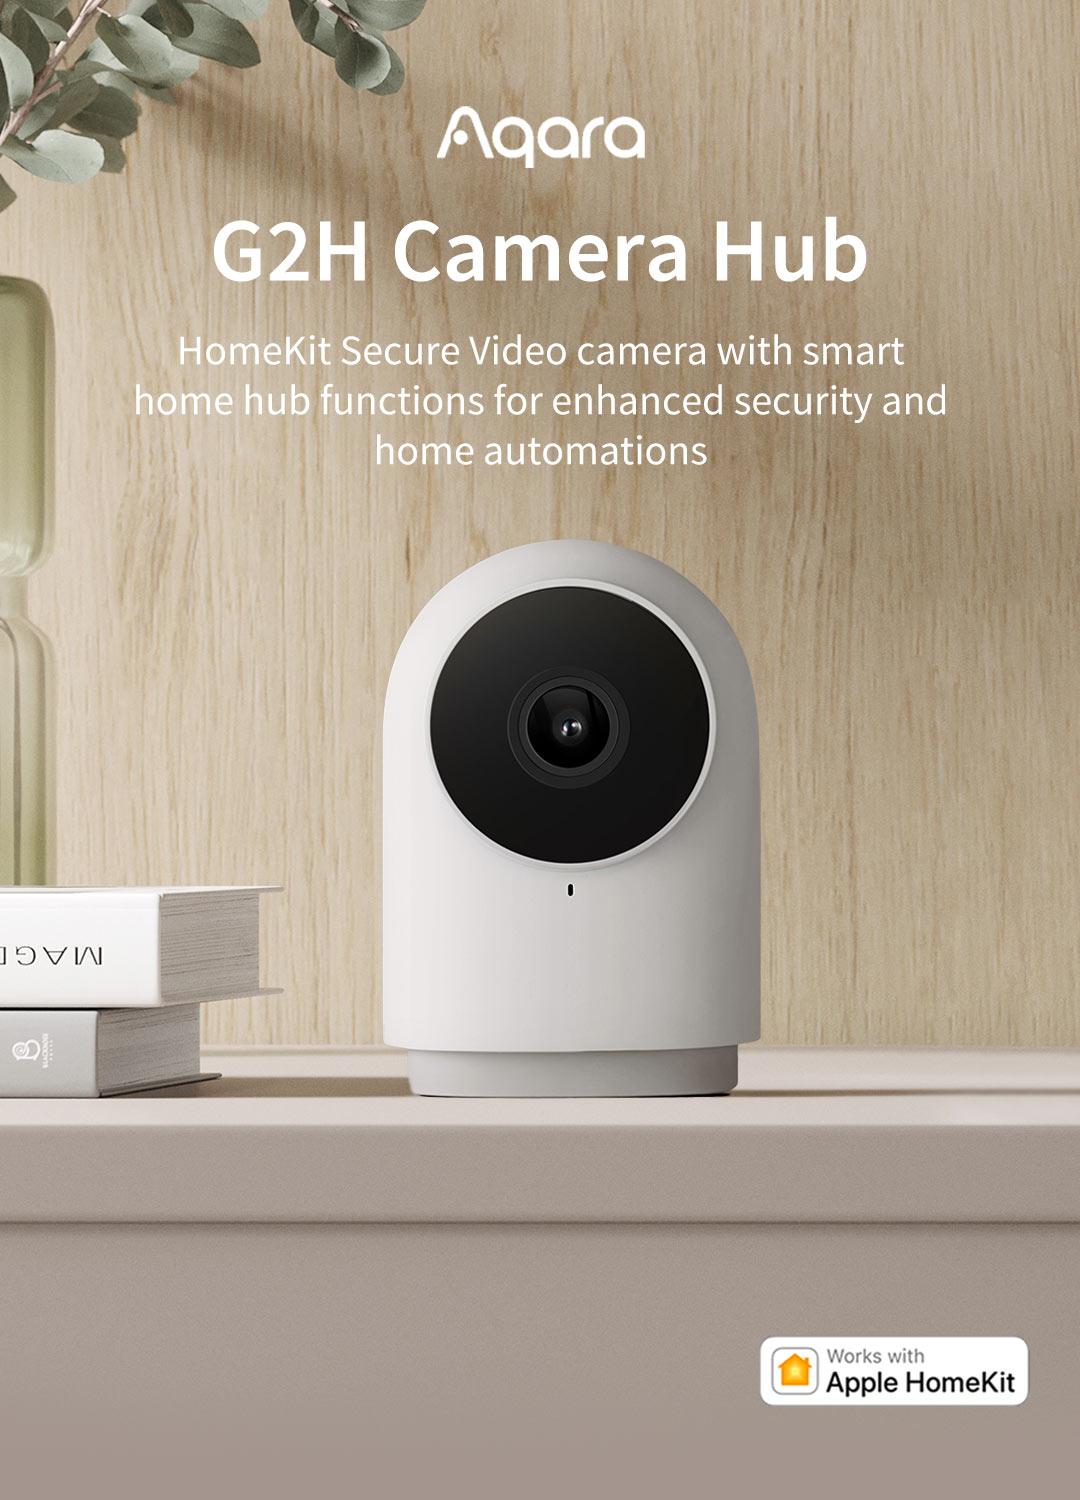 Aqara G2H Pro is a smart home hub and security camera double header 